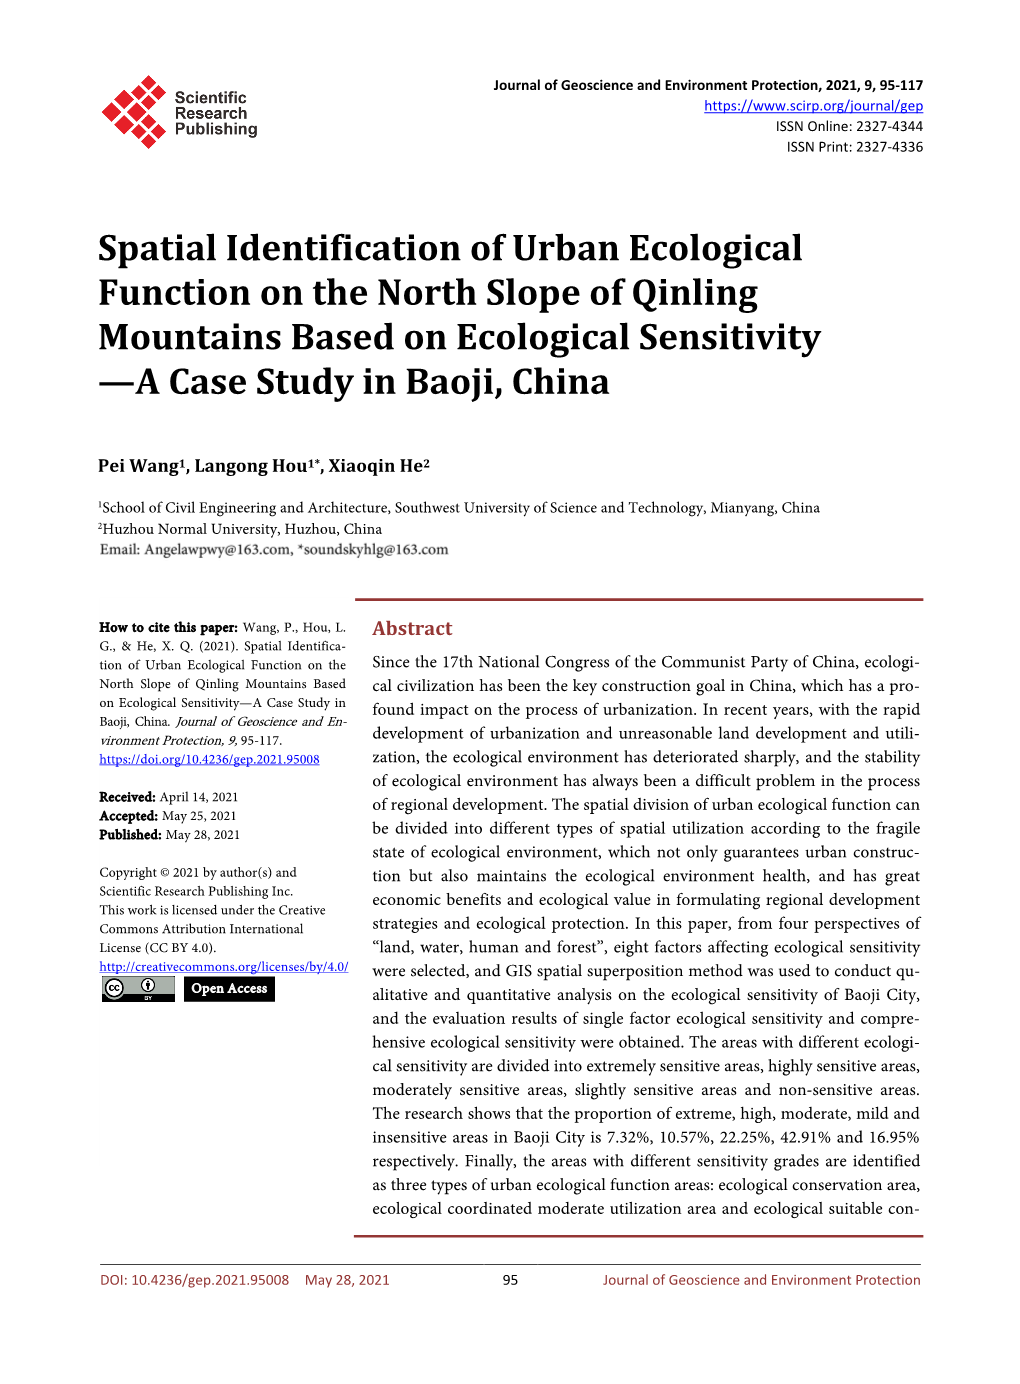 Spatial Identification of Urban Ecological Function on the North Slope of Qinling Mountains Based on Ecological Sensitivity —A Case Study in Baoji, China